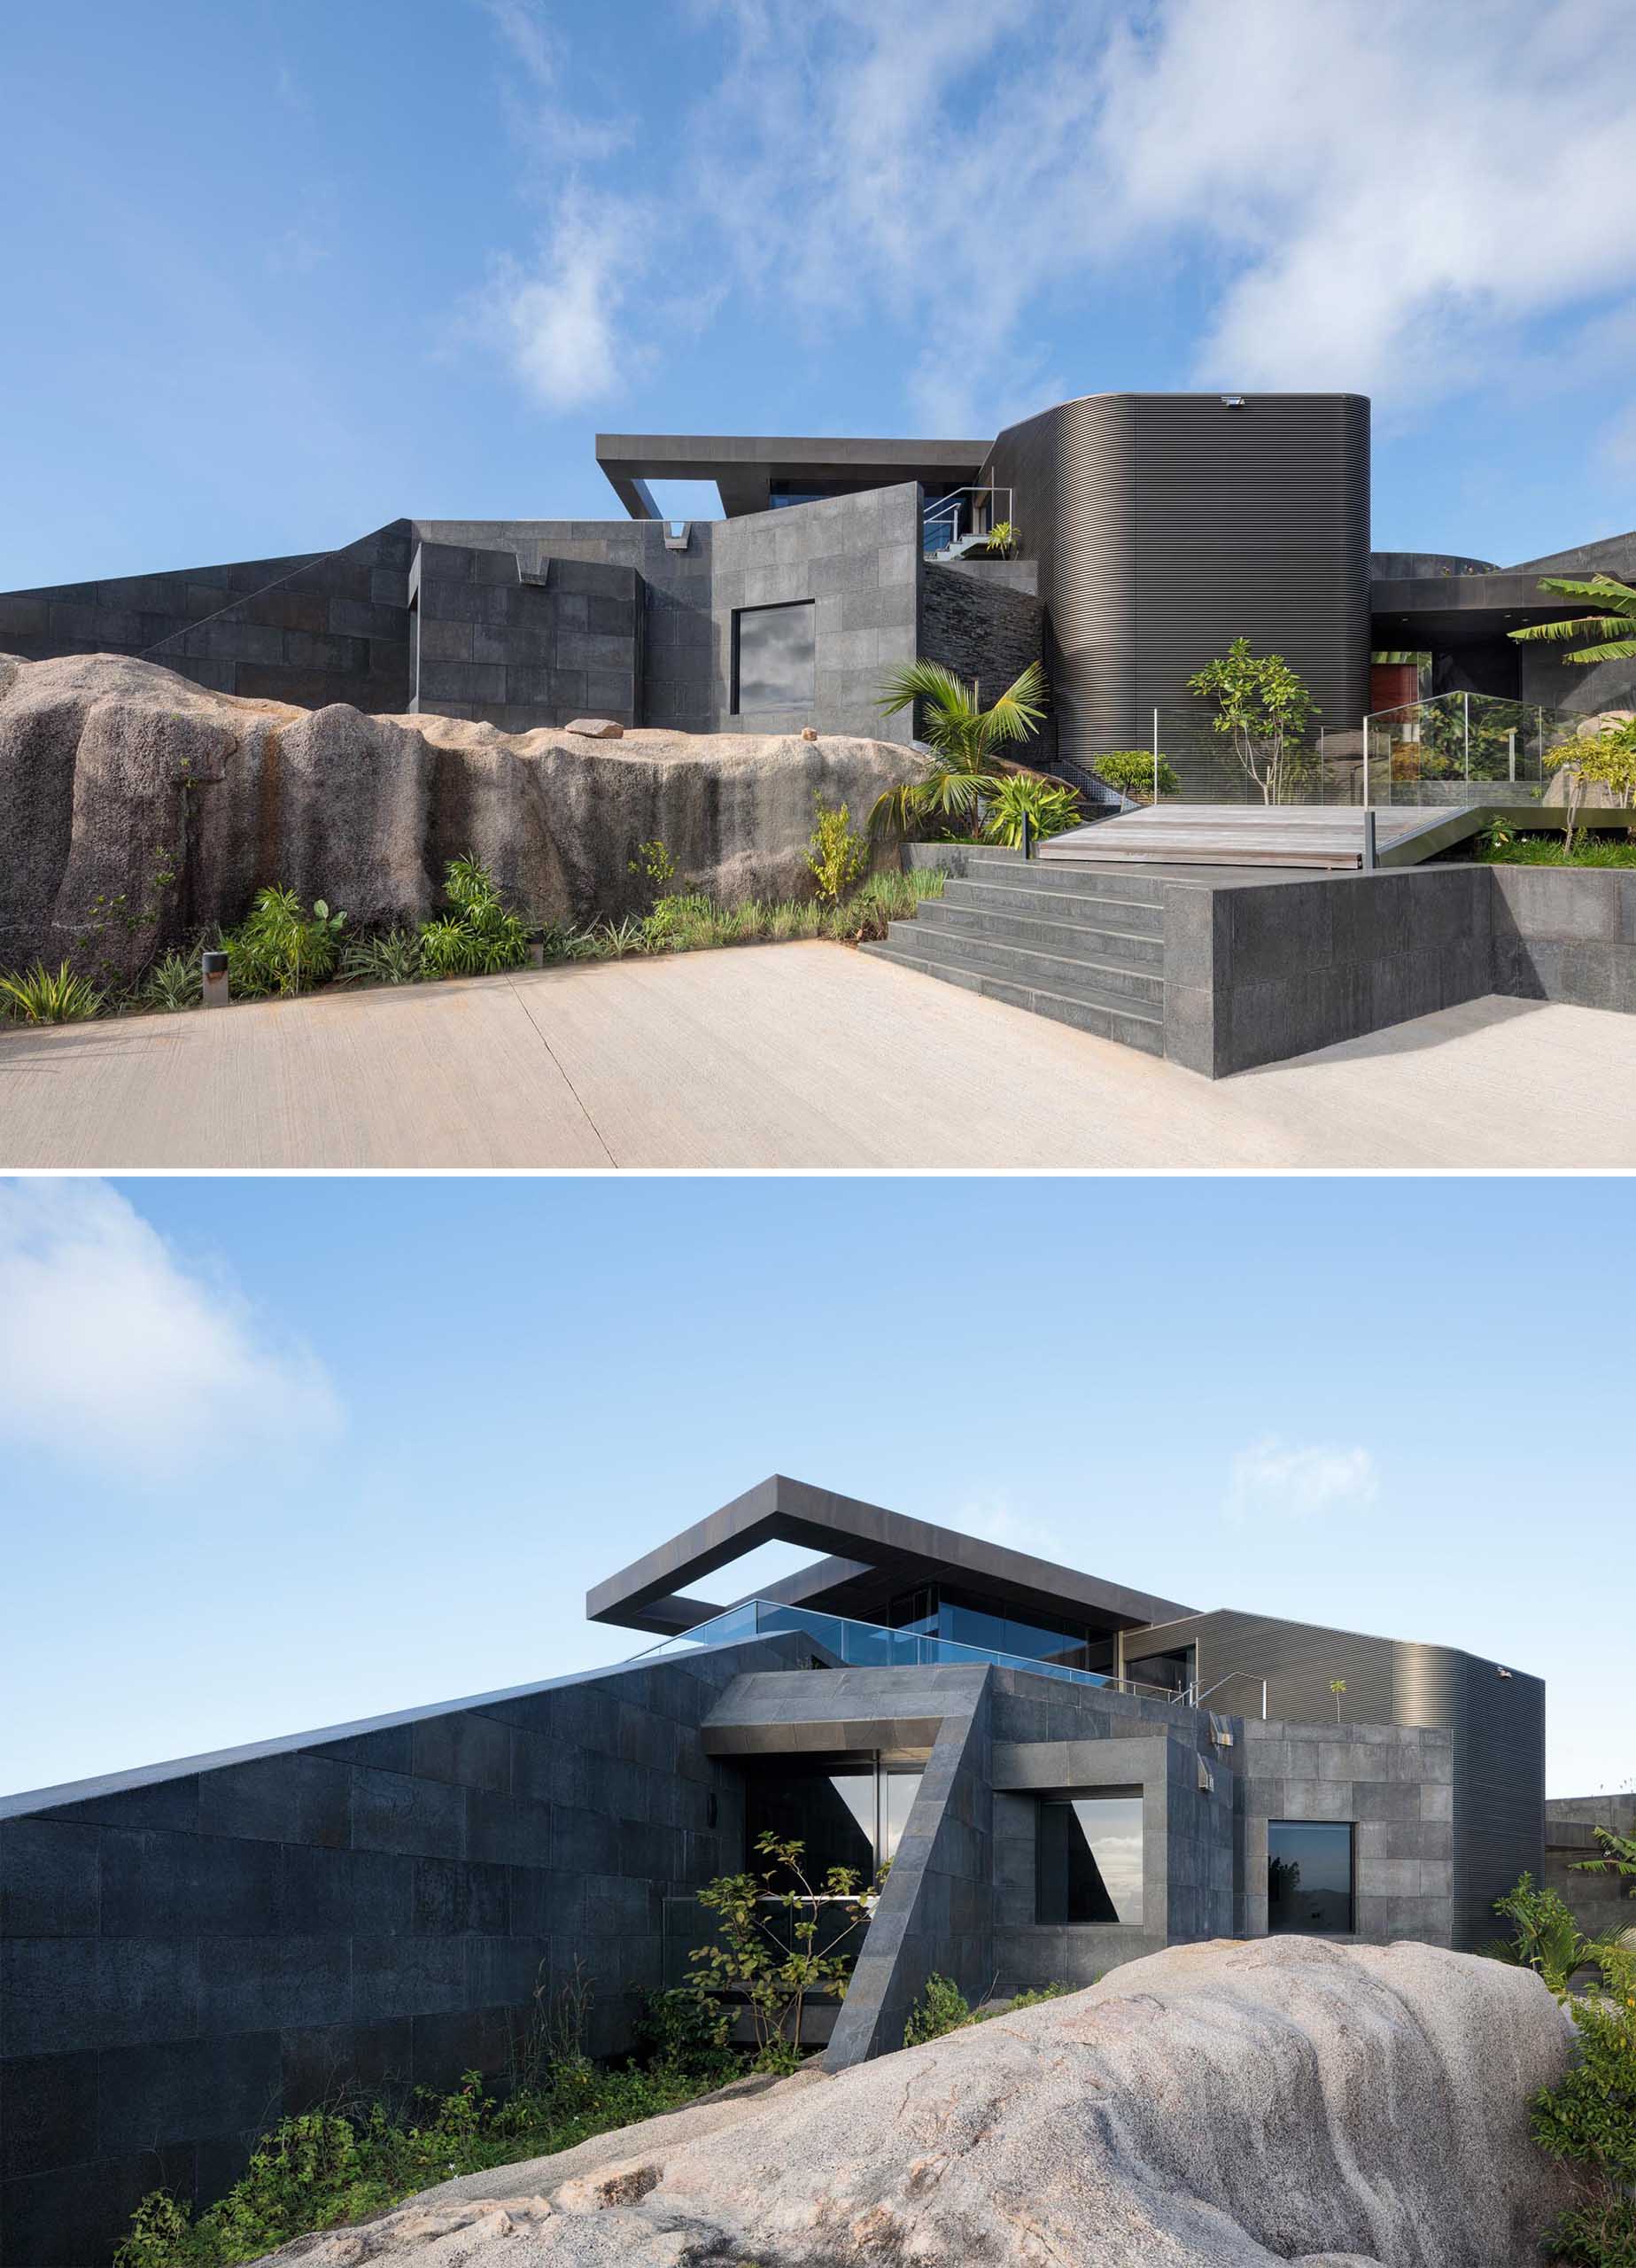 Rising from their surroundings as linear geometric forms, these modern homes rest on weathered granitic outcrops that are eye-catching elements of the local landscape.